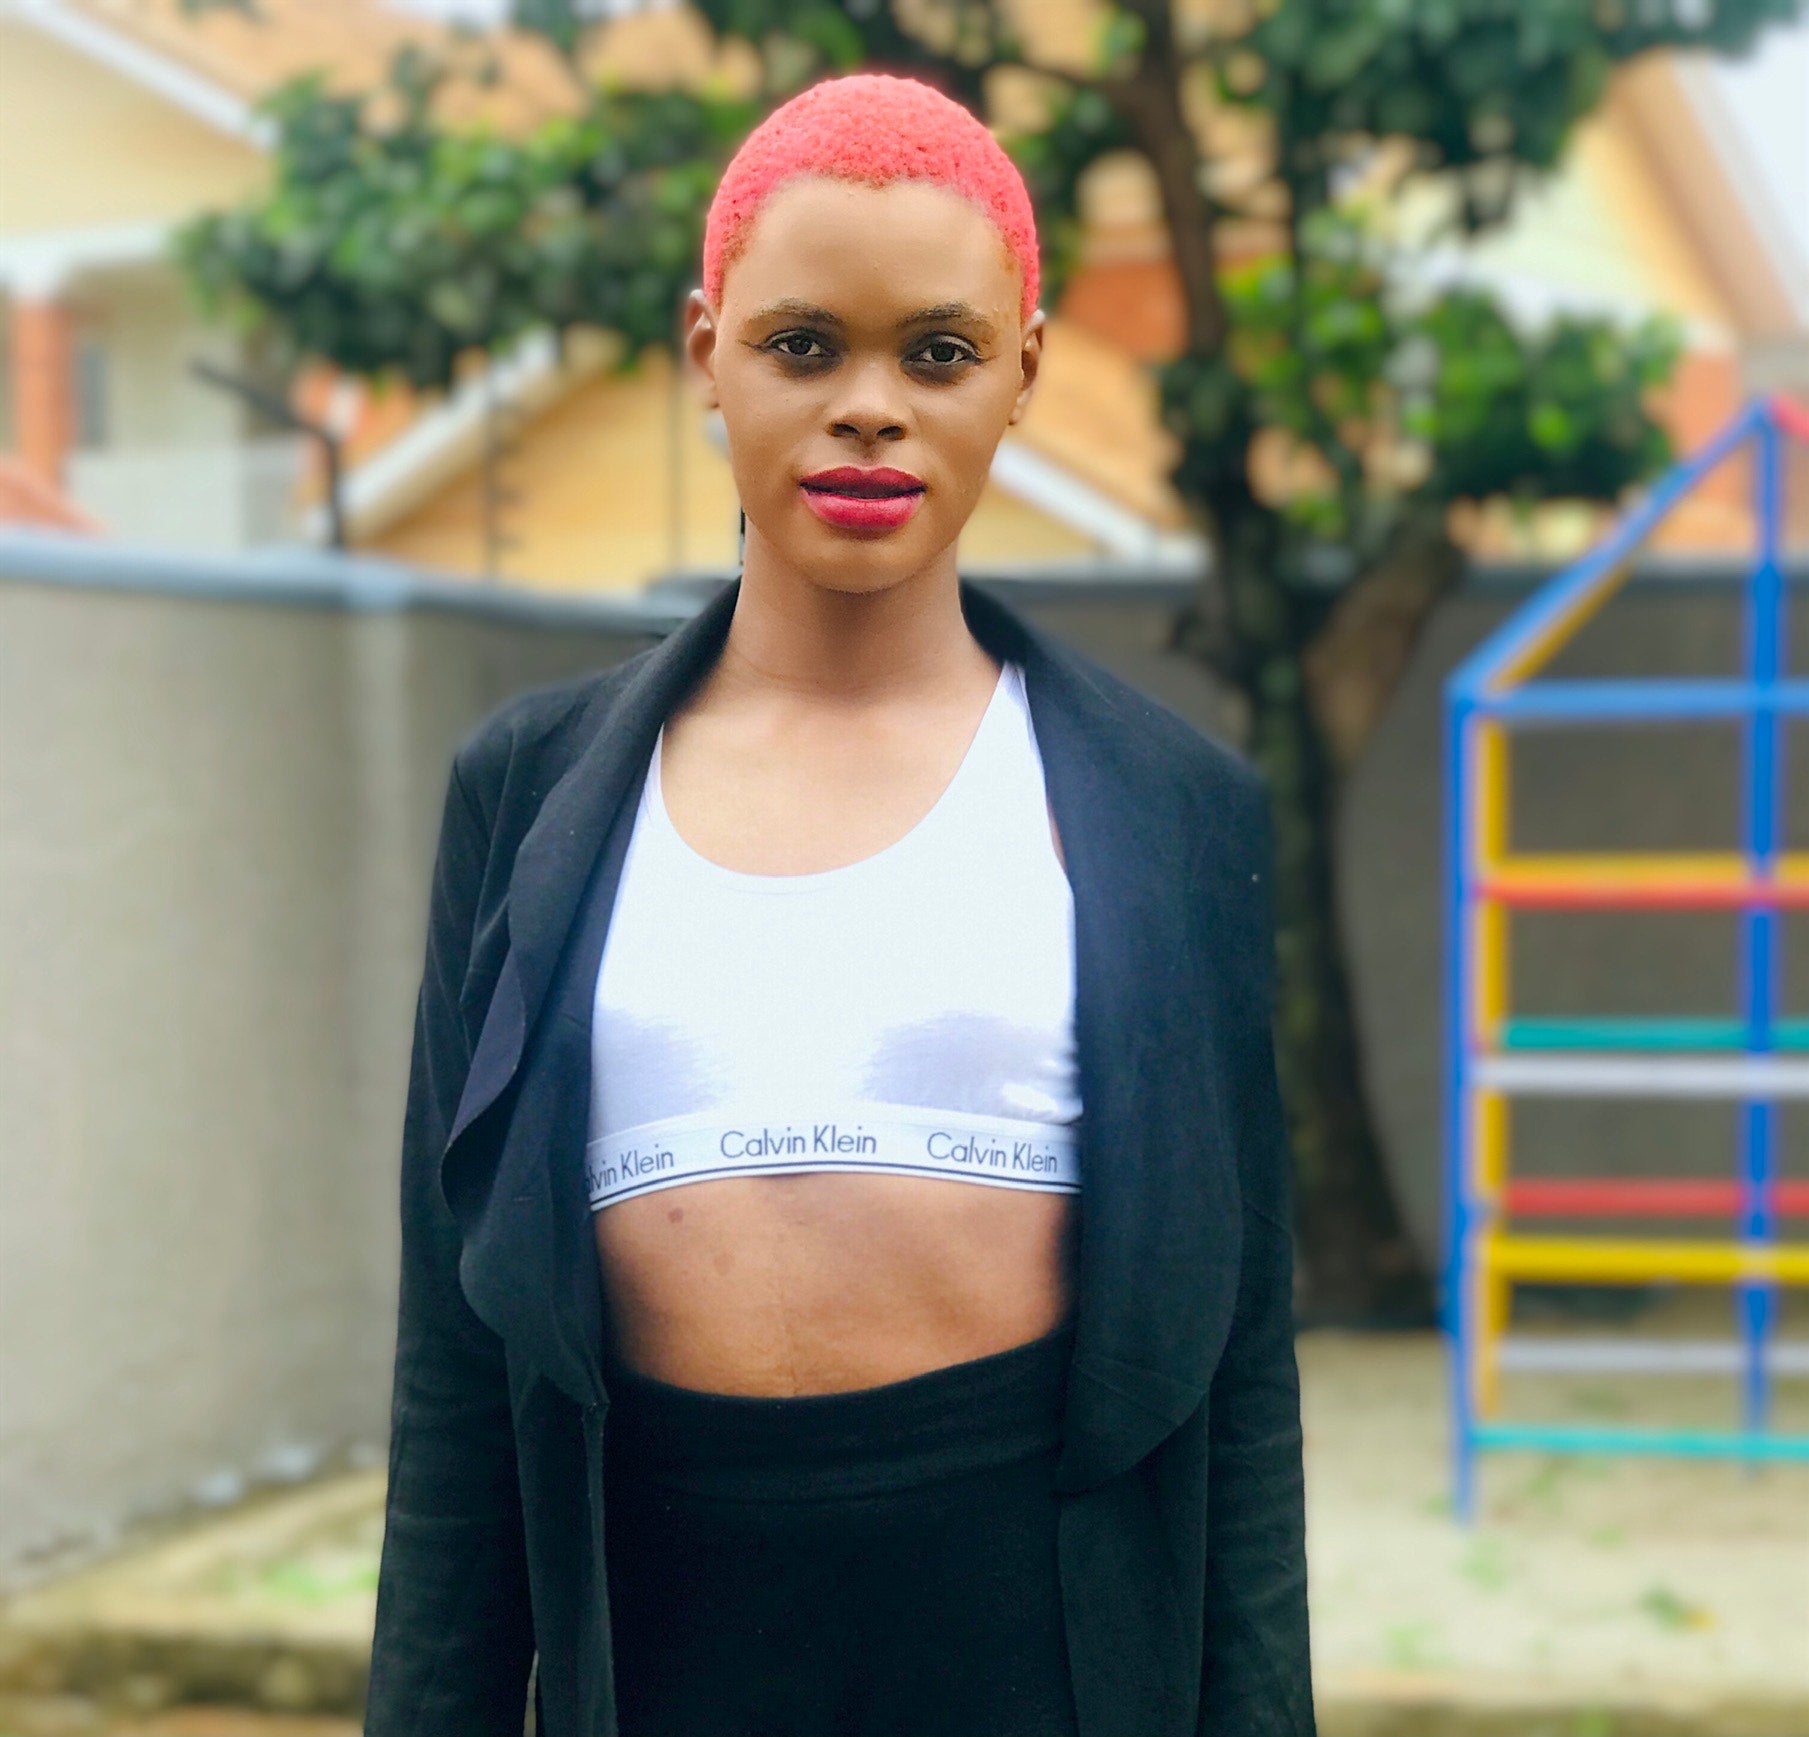 Point of Pride - Kattia from South Africa writes, Thank you so much for  this amazing opportunity of [receiving free femme shapewear.] As a  transgender woman in South Africa, things are really